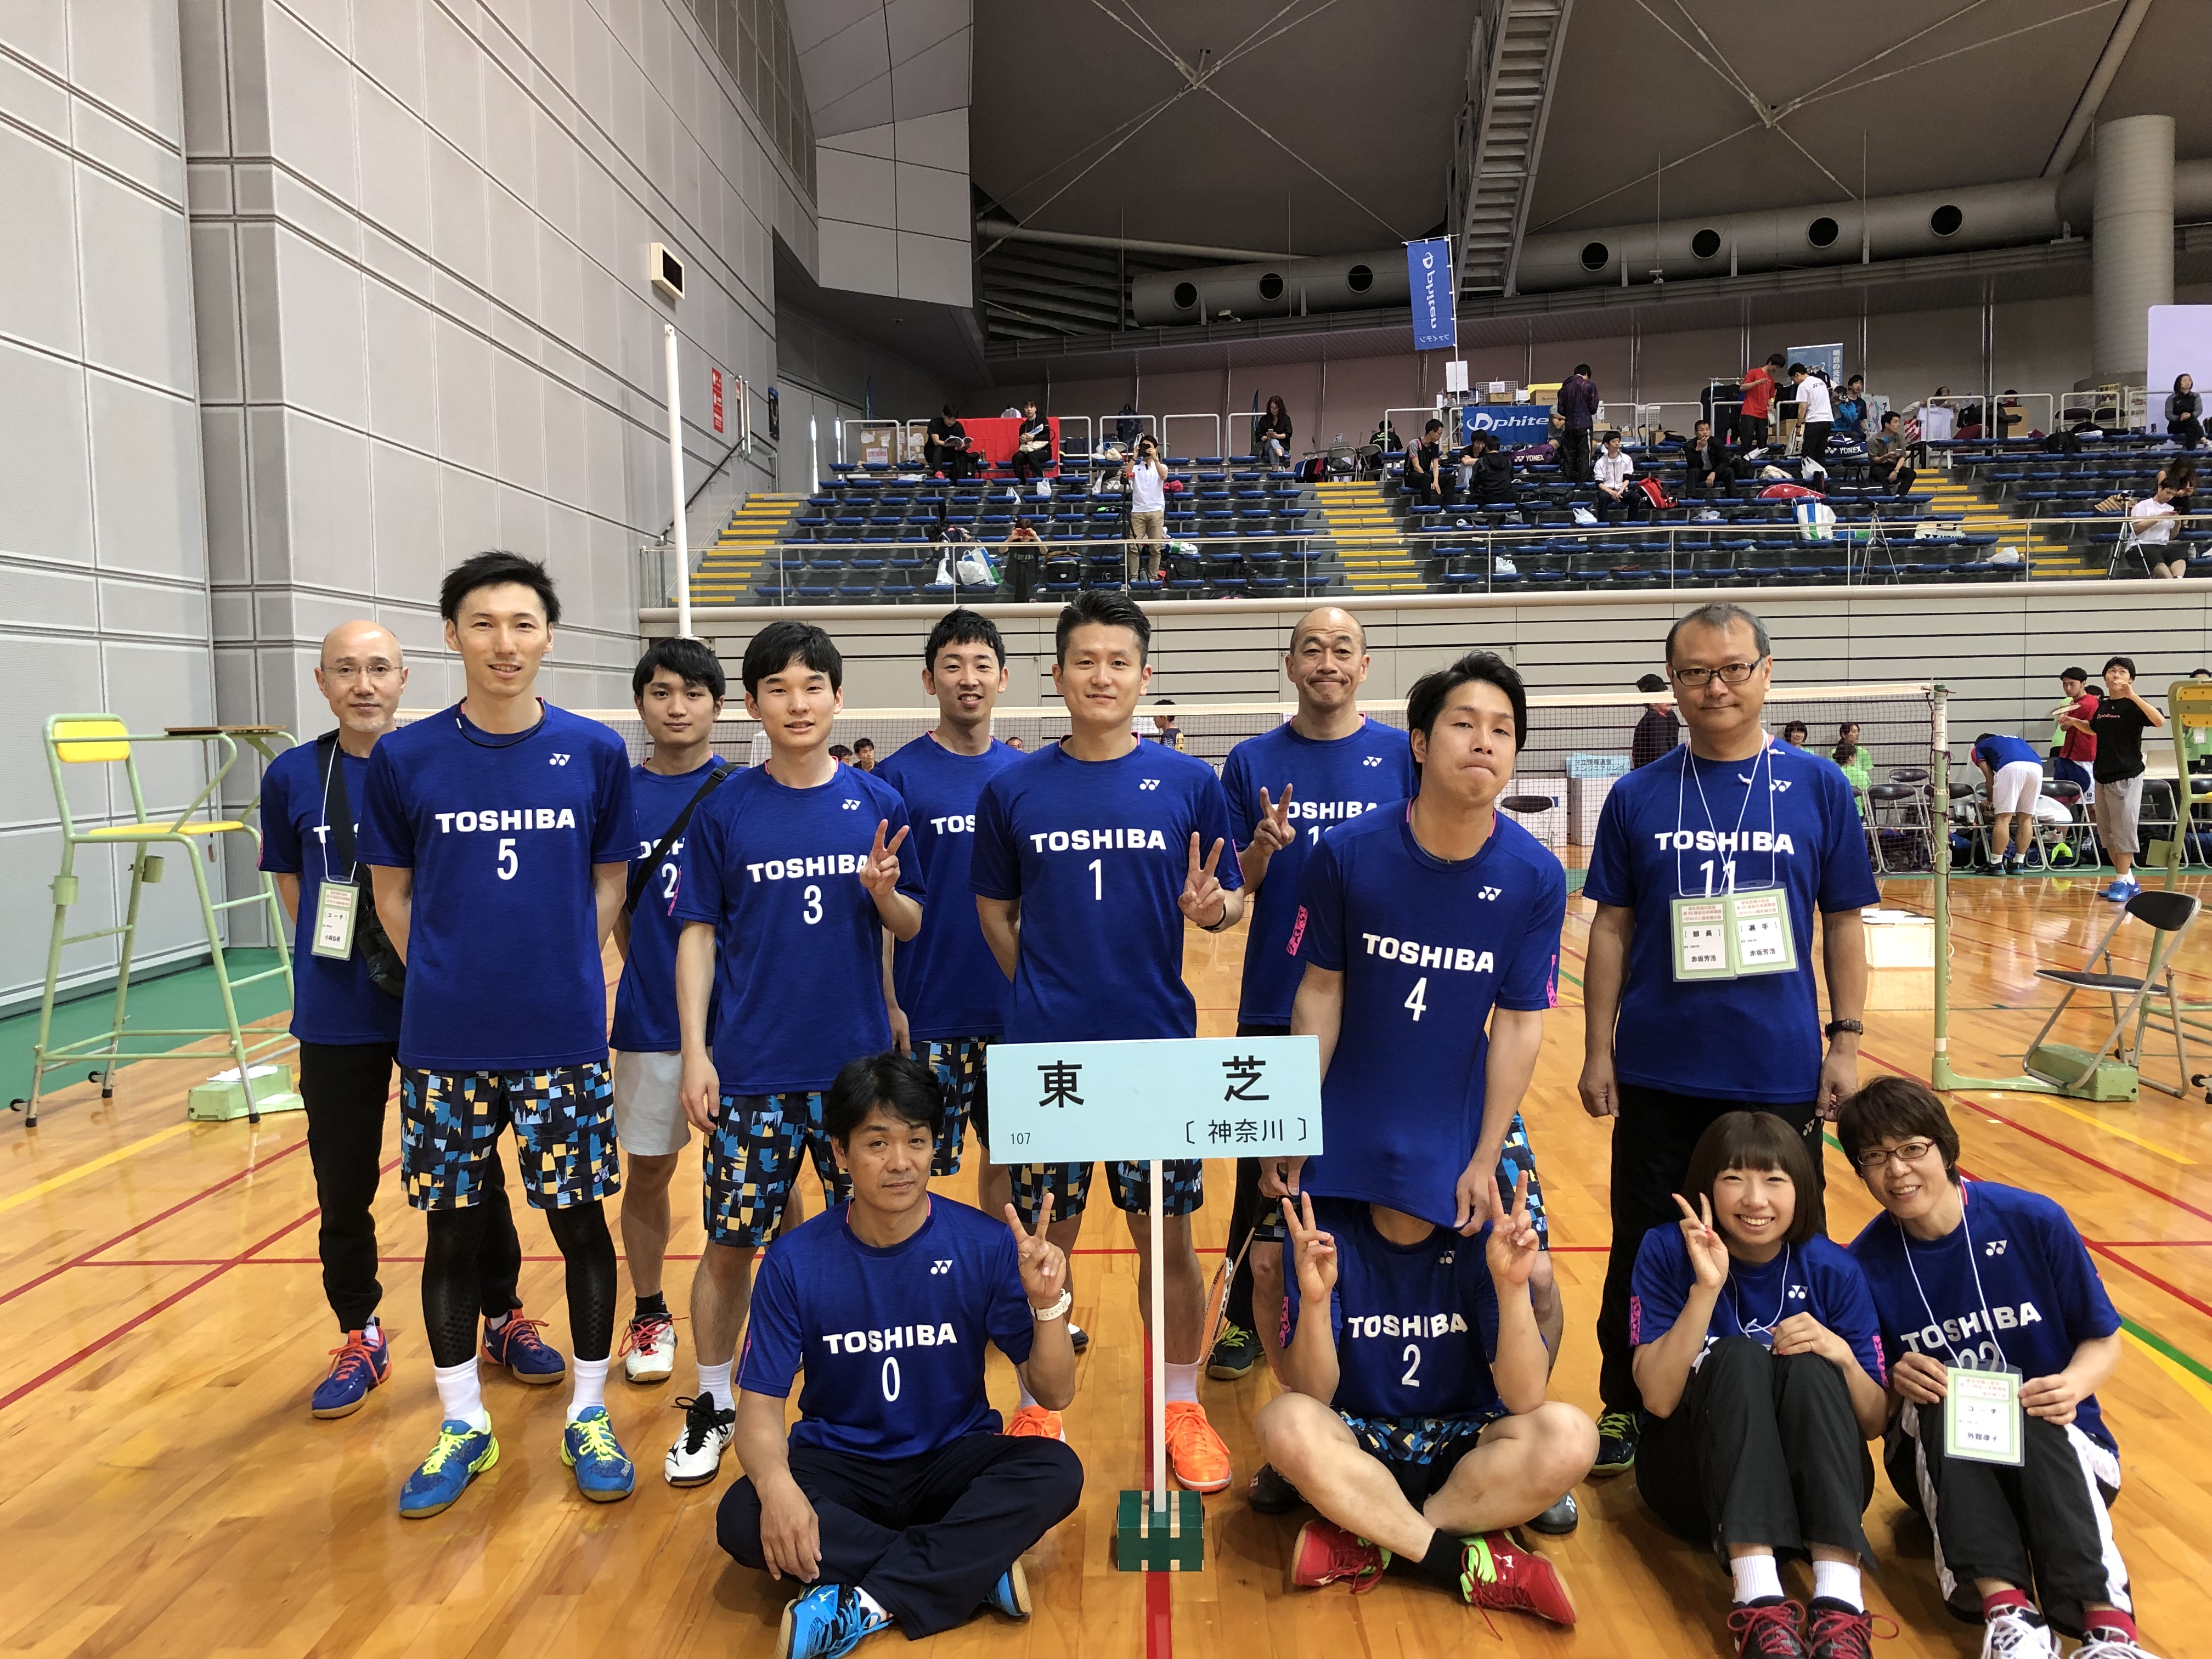 Mr. Hino, donned the number 1 uniform, with members of the Toshiba Badminton Club.